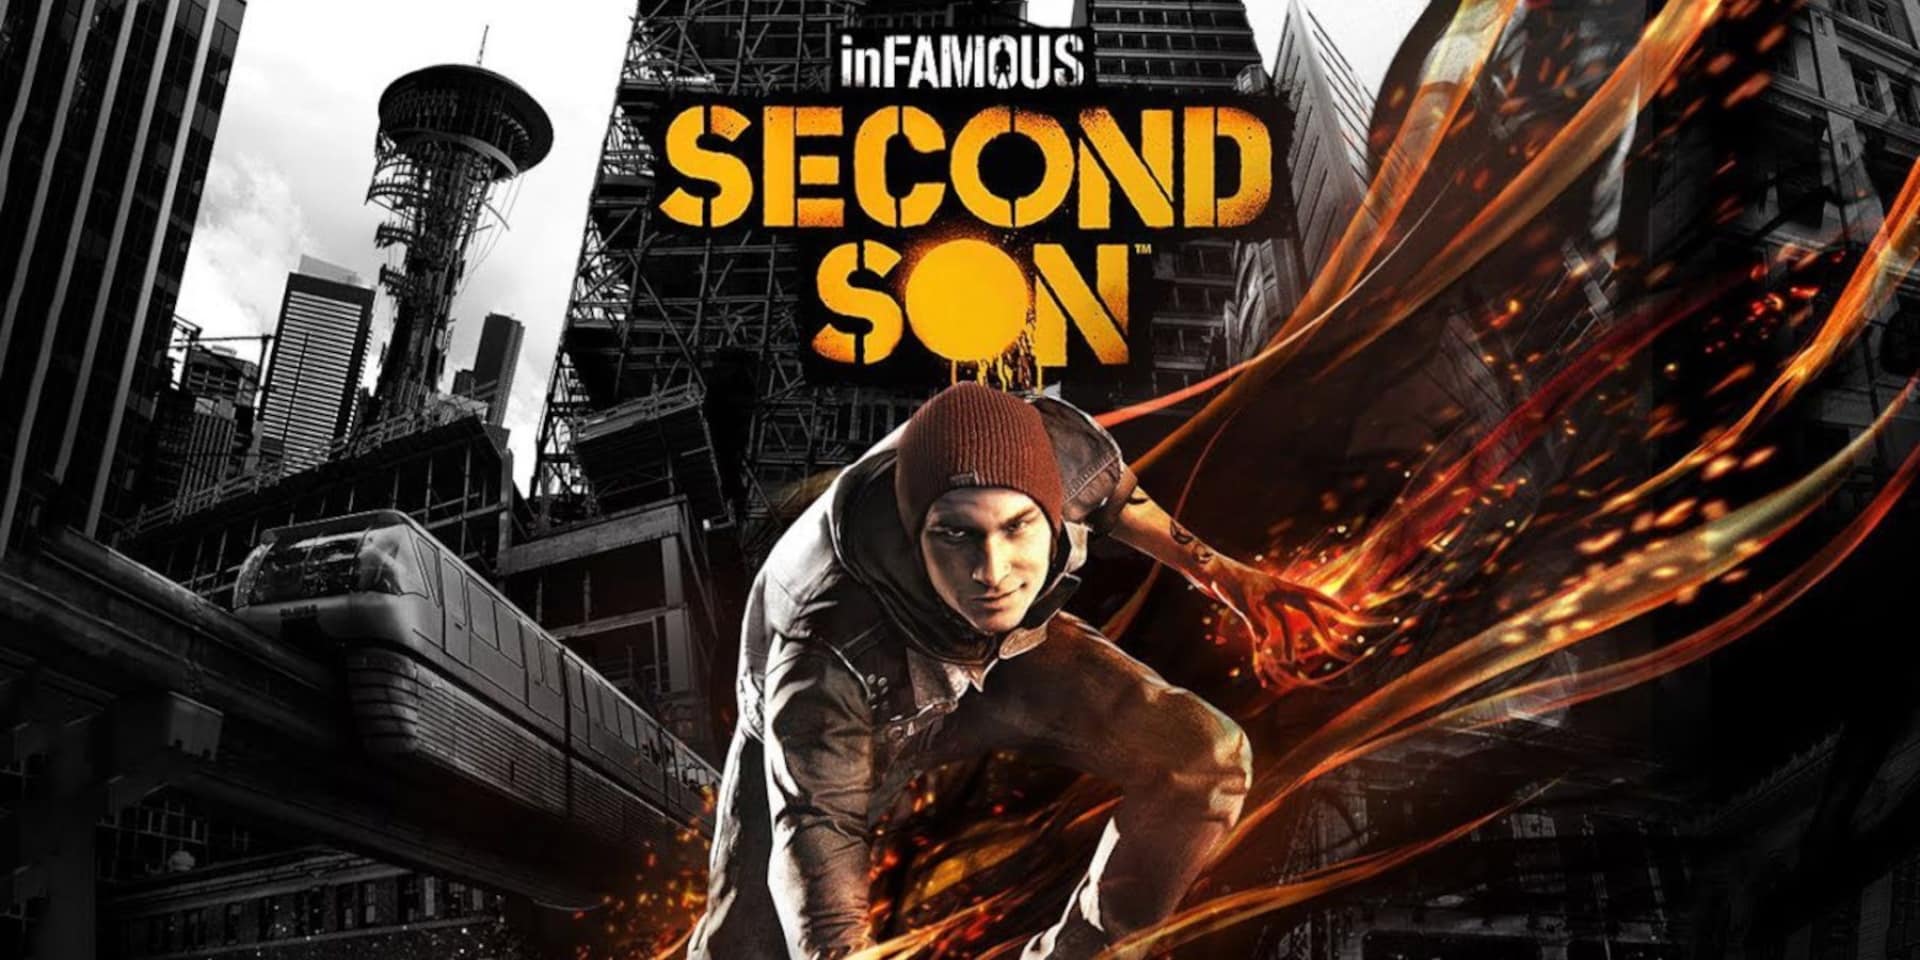 Infamous-Second_Son-GamersRD (1)